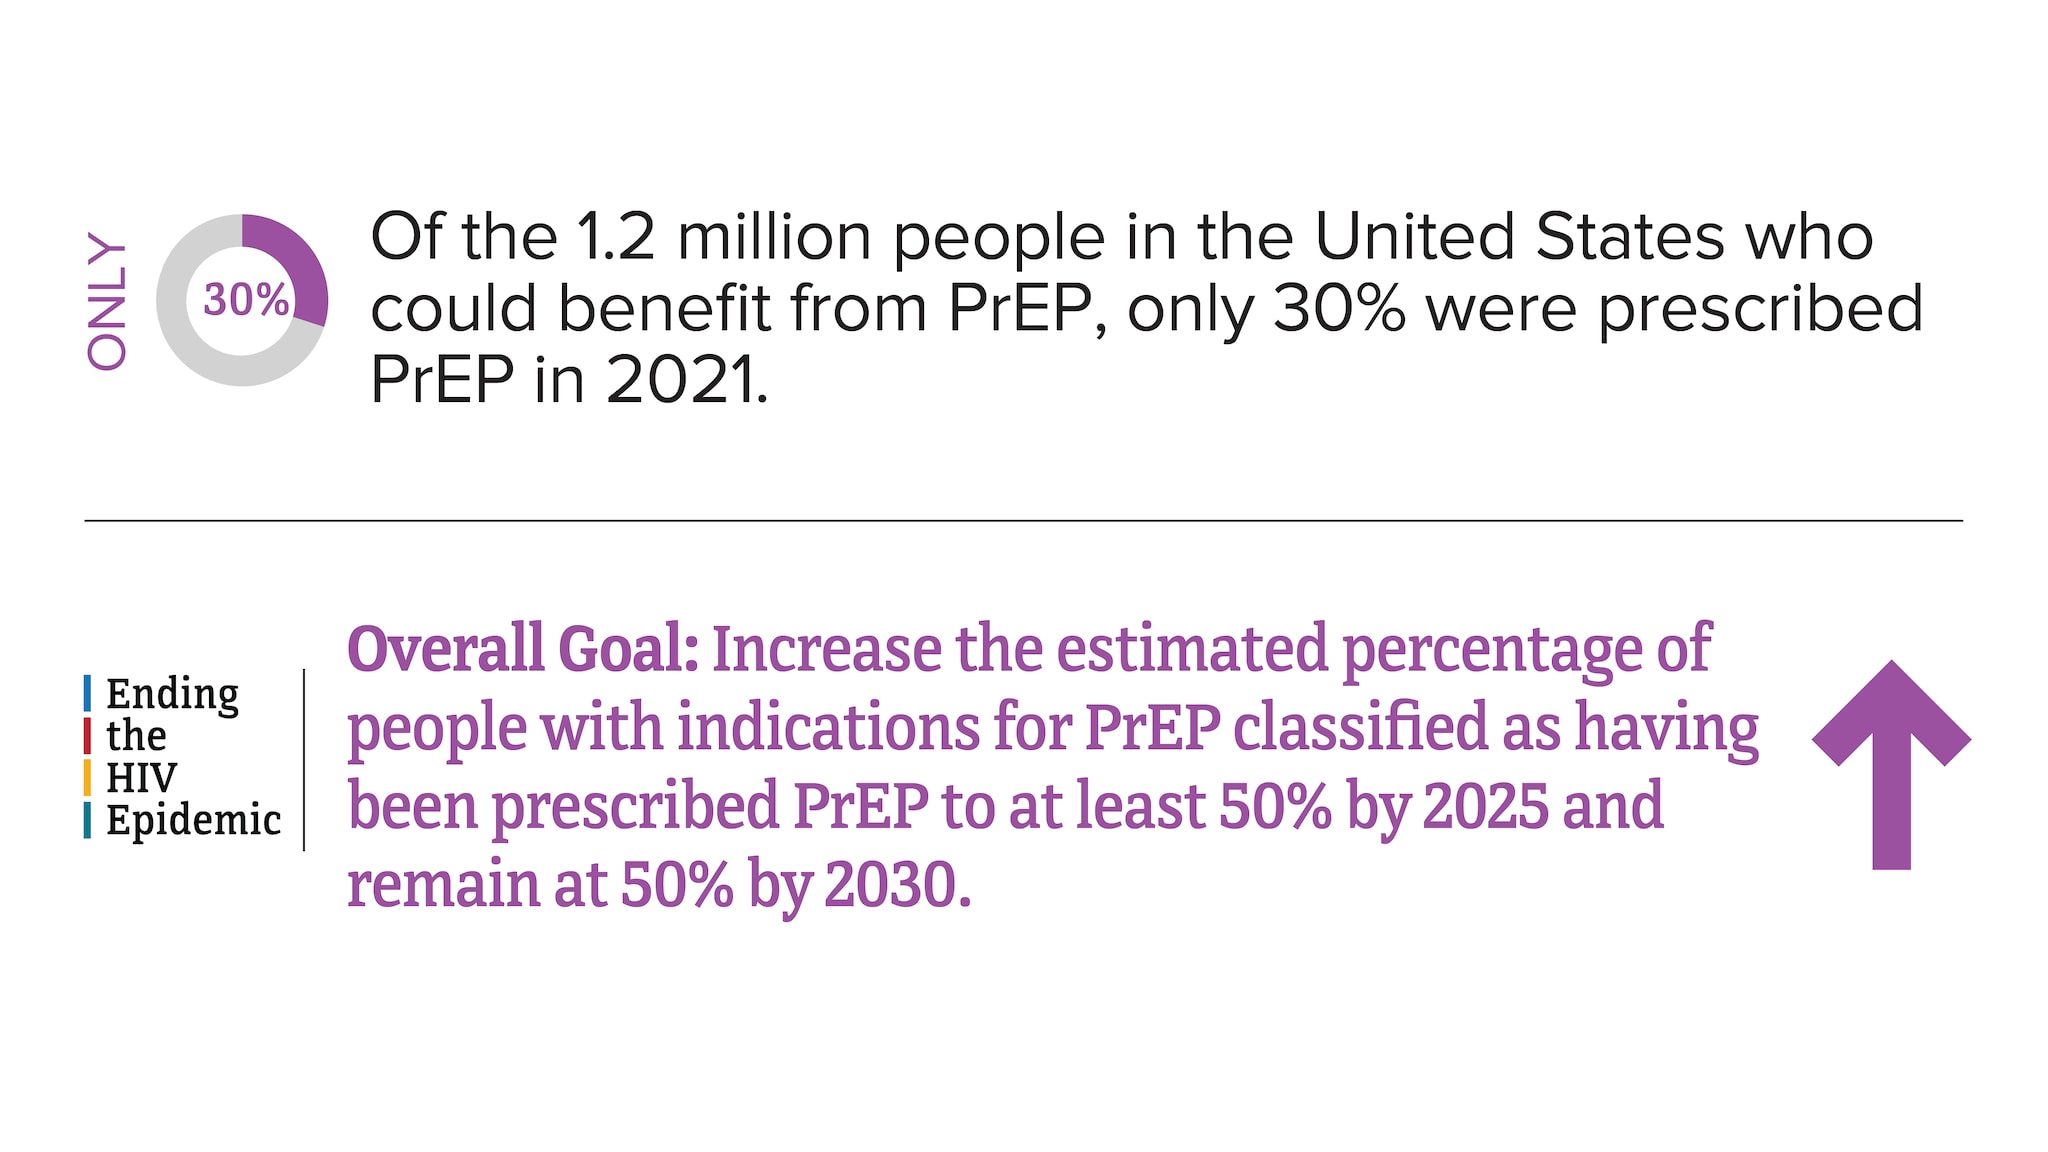 Of the 1.2 million people in the United States who could benefit from PrEP, only 3o percent were prescribed PrEP in 2021. The Ending the HIV Epidemic overall goal is to increase the estimated percentage of people with indications for PrEP classified as having been prescribed PrEP to at least 50 percent by 2025 and remain at 50 percent by 2030.